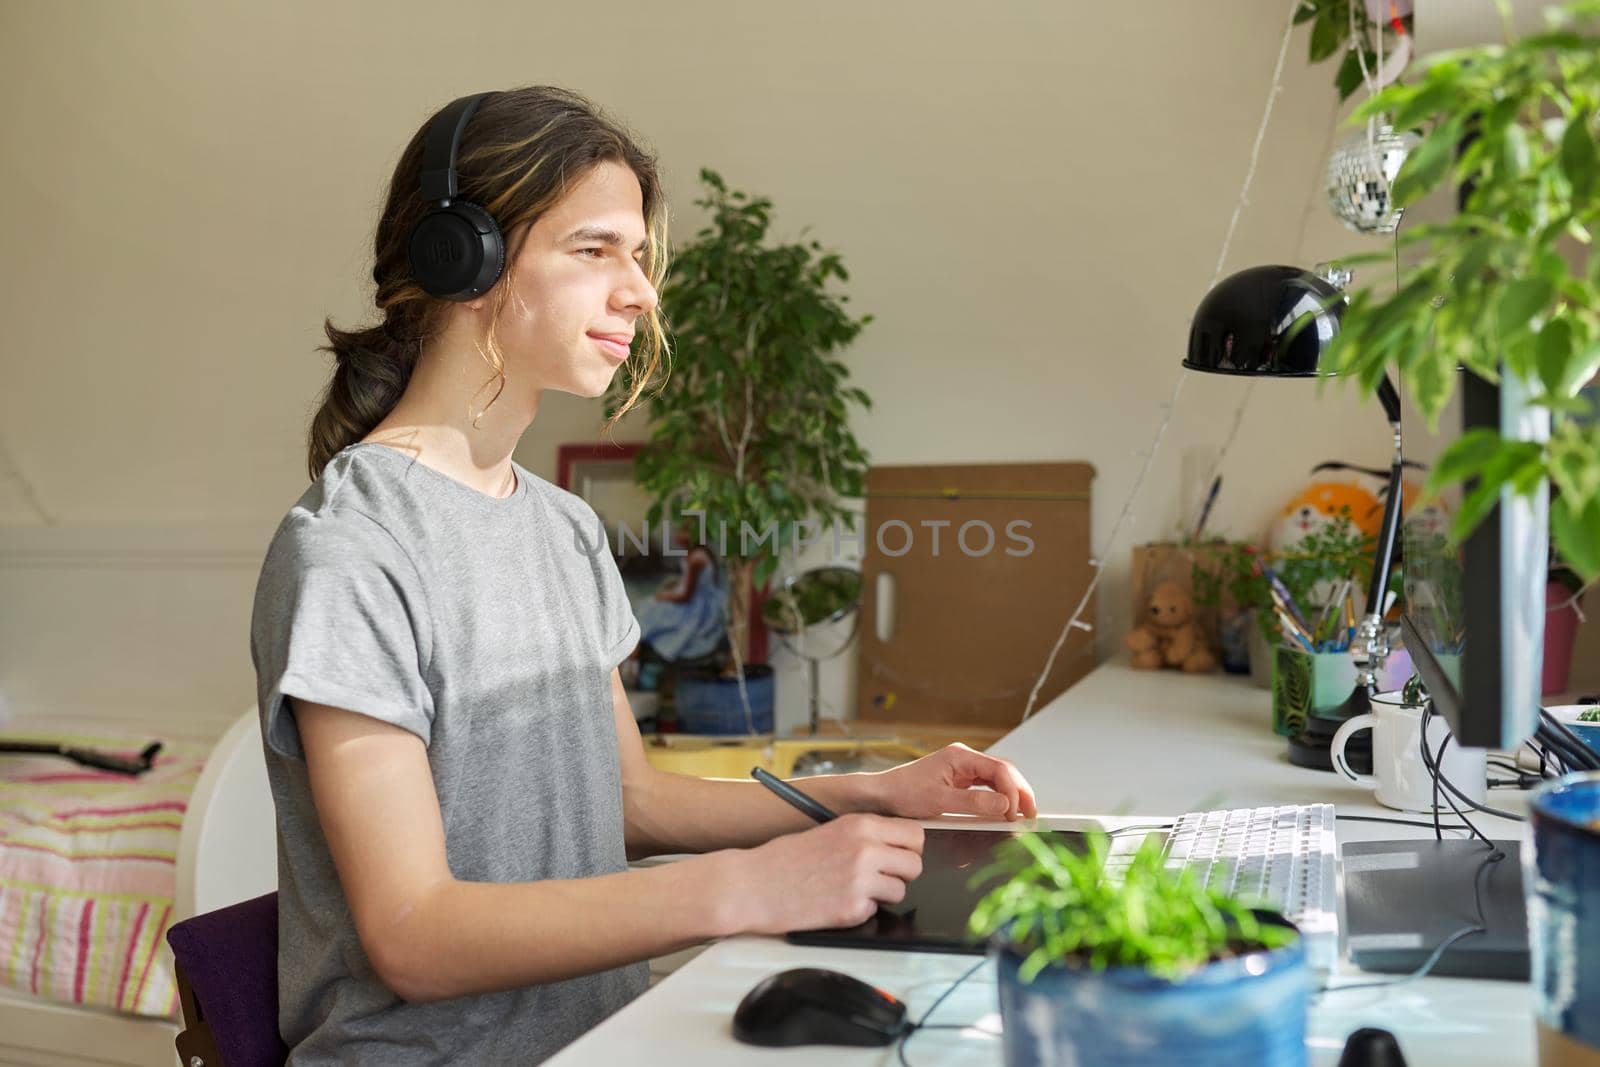 A teenage guy in headphones sitting at a table at home using a computer and a graphics tablet. Creativity, hobby, leisure, adolescence, technology, school, learning concept